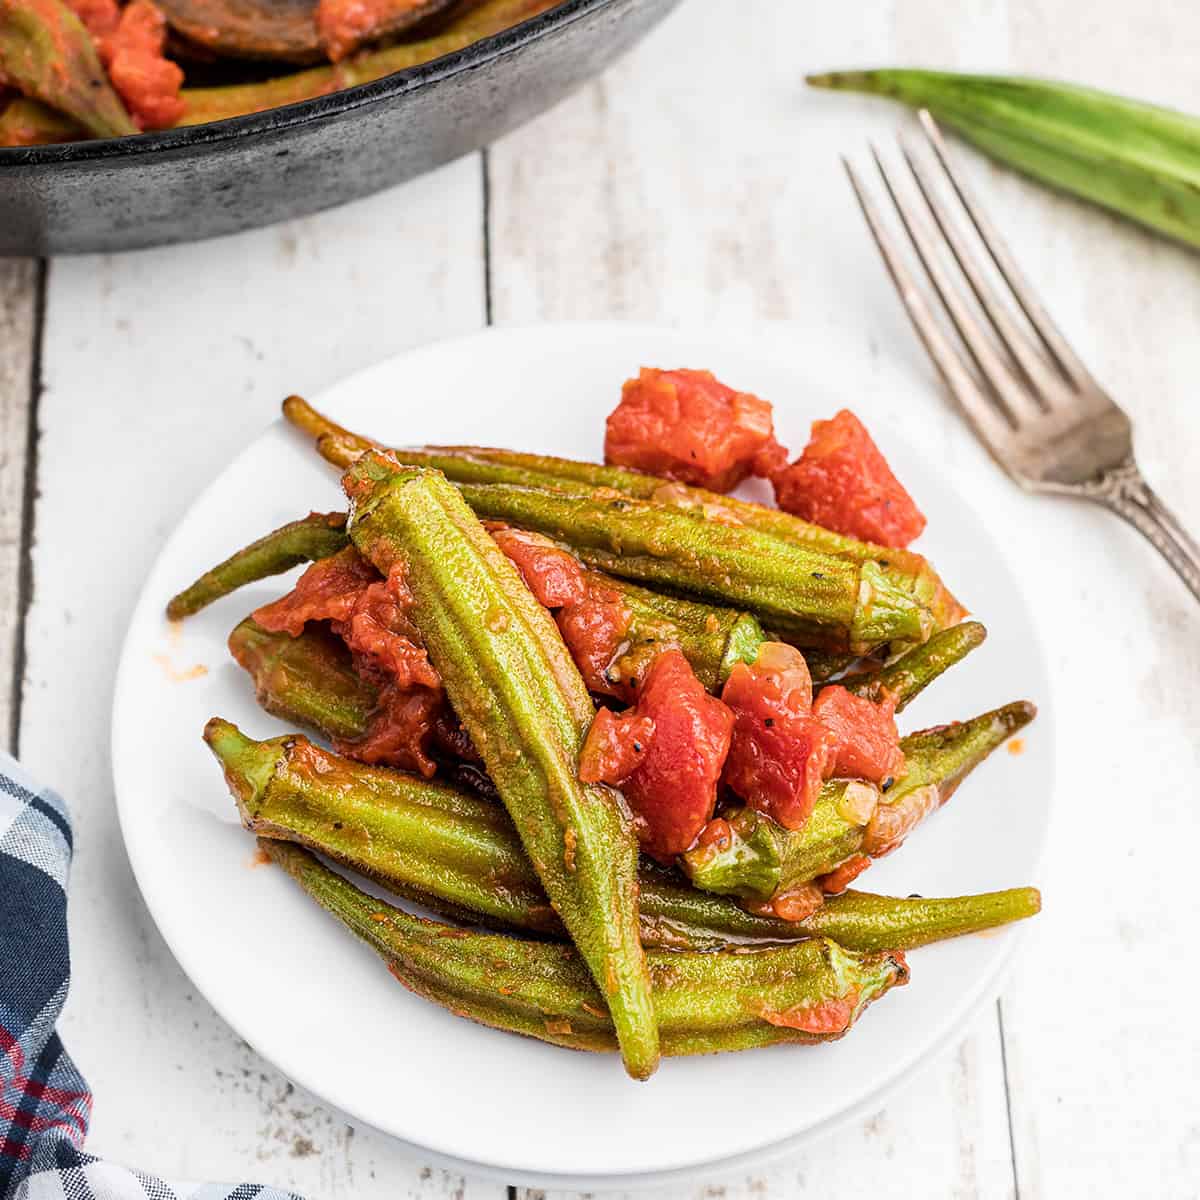 A serving of okra and tomatoes on a white plate.